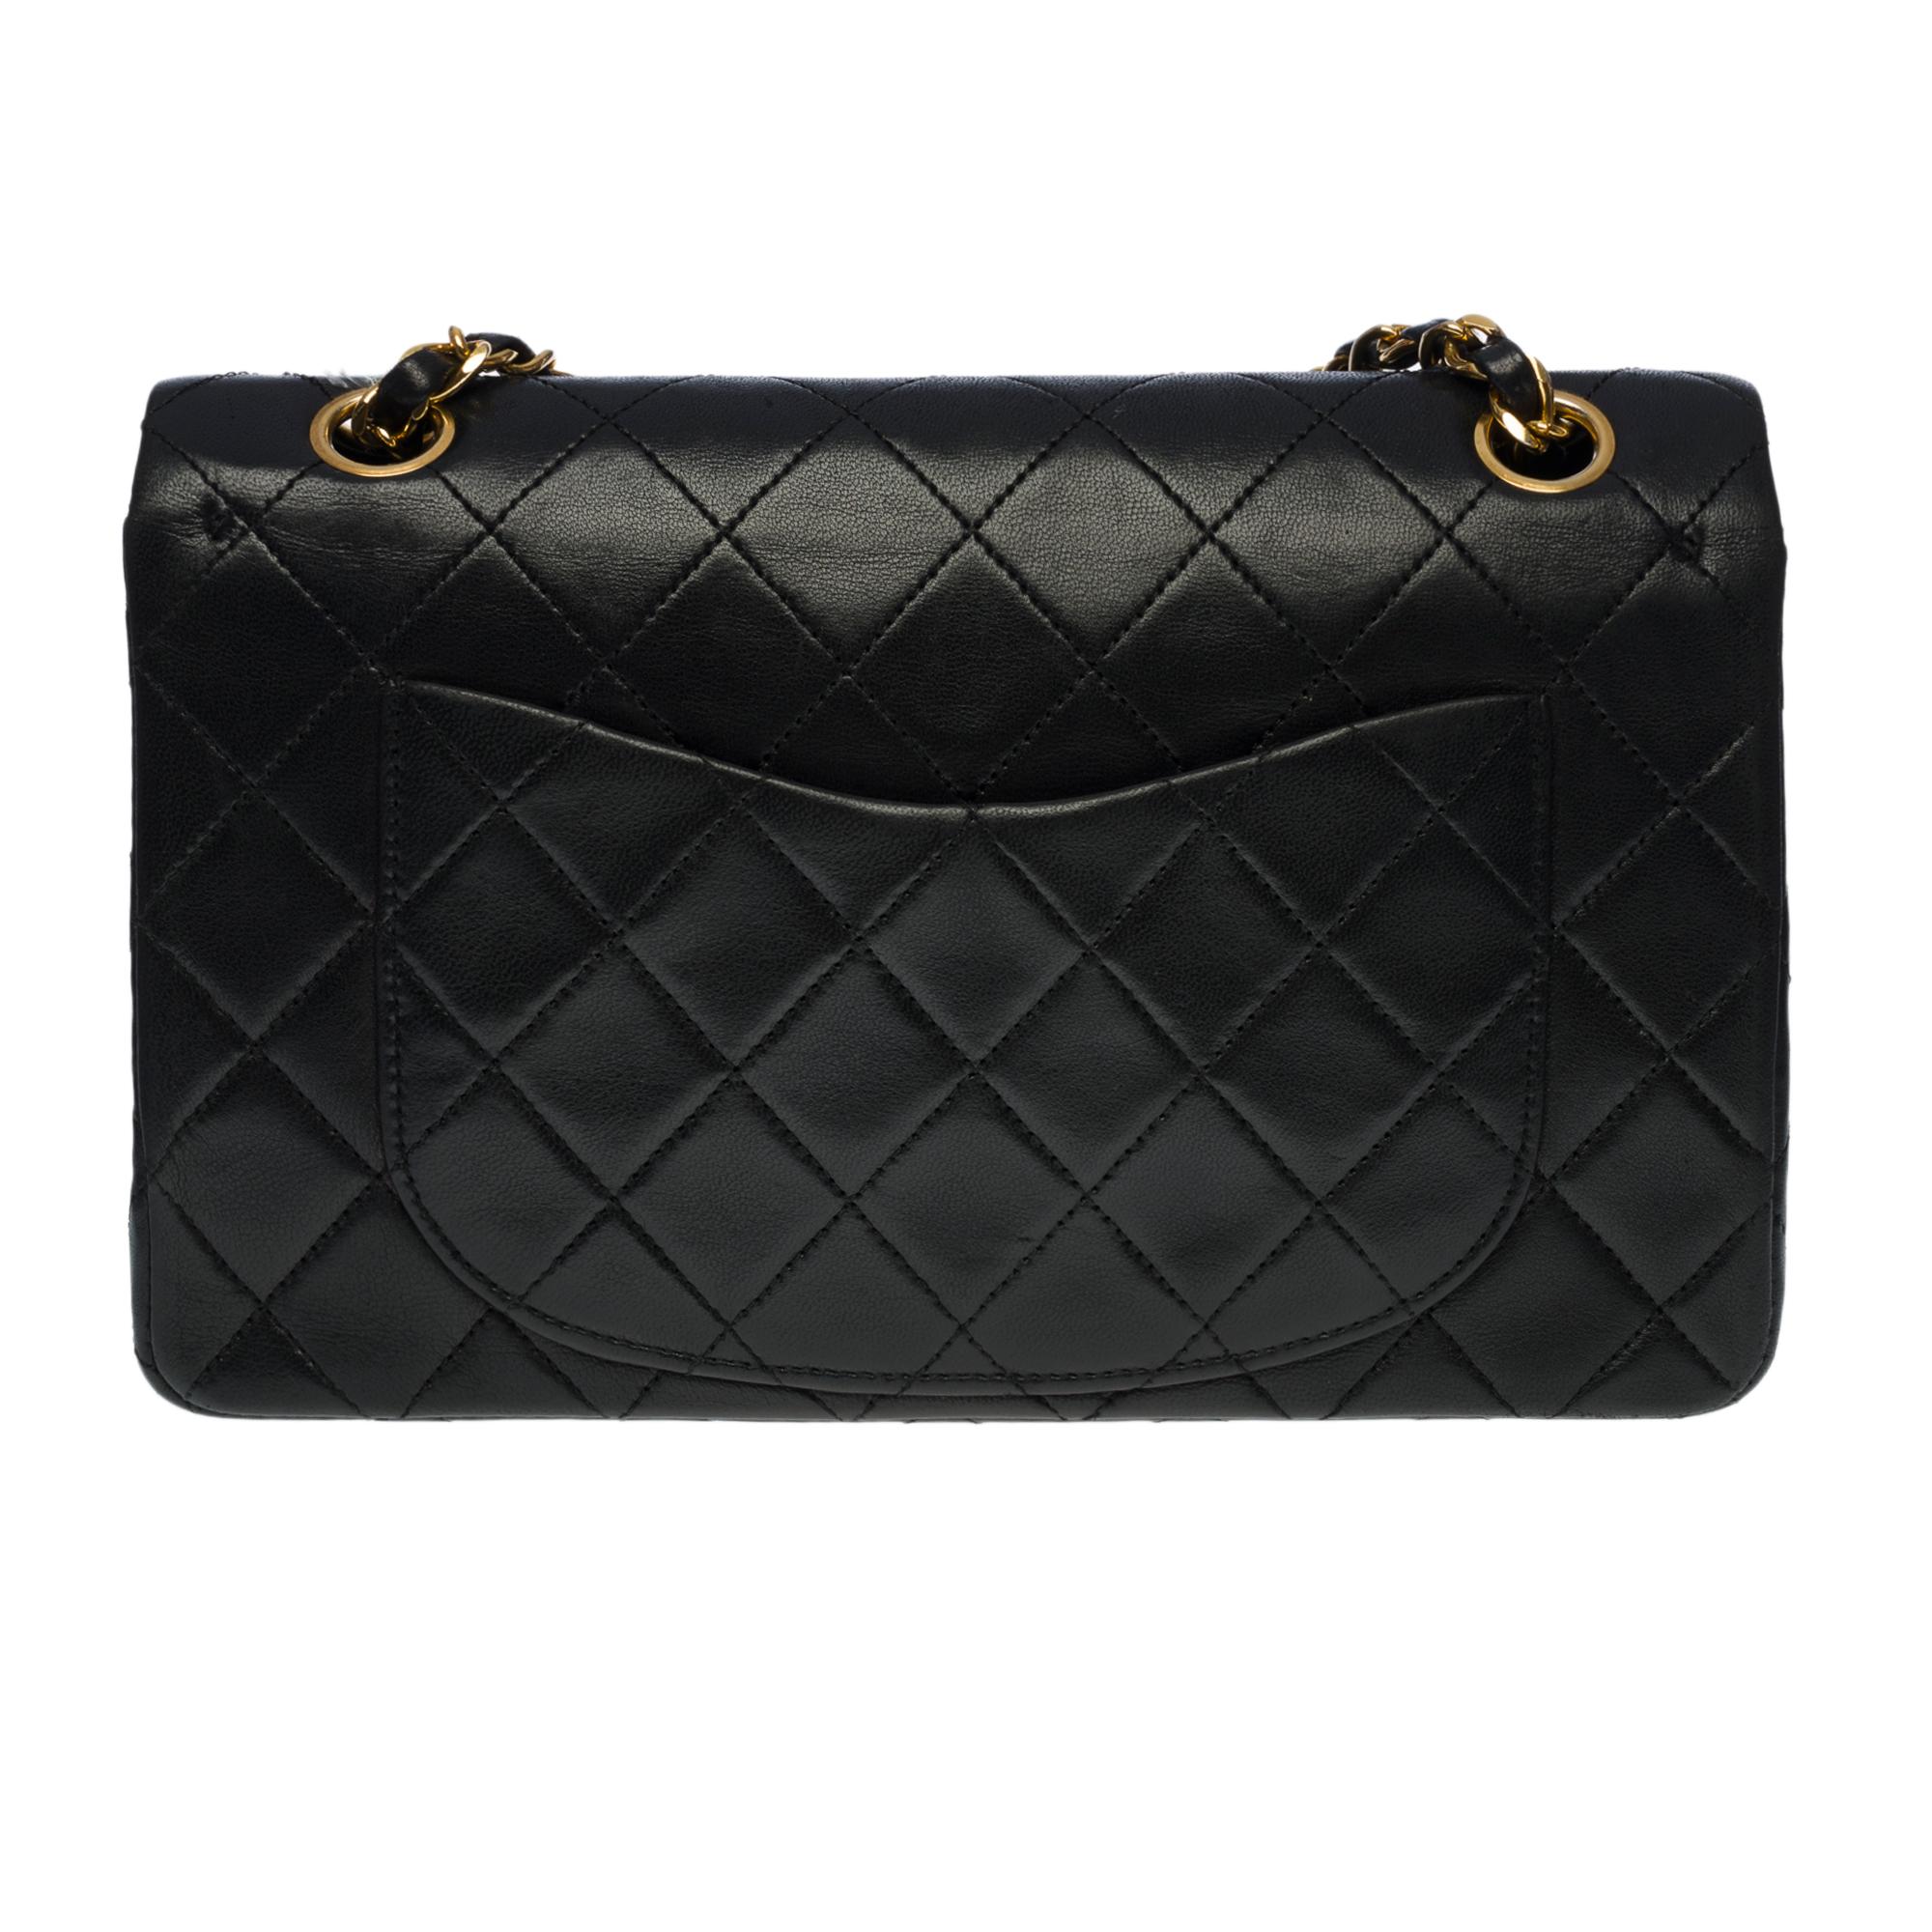 The coveted Chanel Timeless 23cm double flap bag in black quilted leather, gold-tone hardware, a gold-tone chain handle interlaced with black leather for shoulder and shoulder strap
Backpack pocket
Flap closure, gold CC logo clasp
Double flap
Zip on